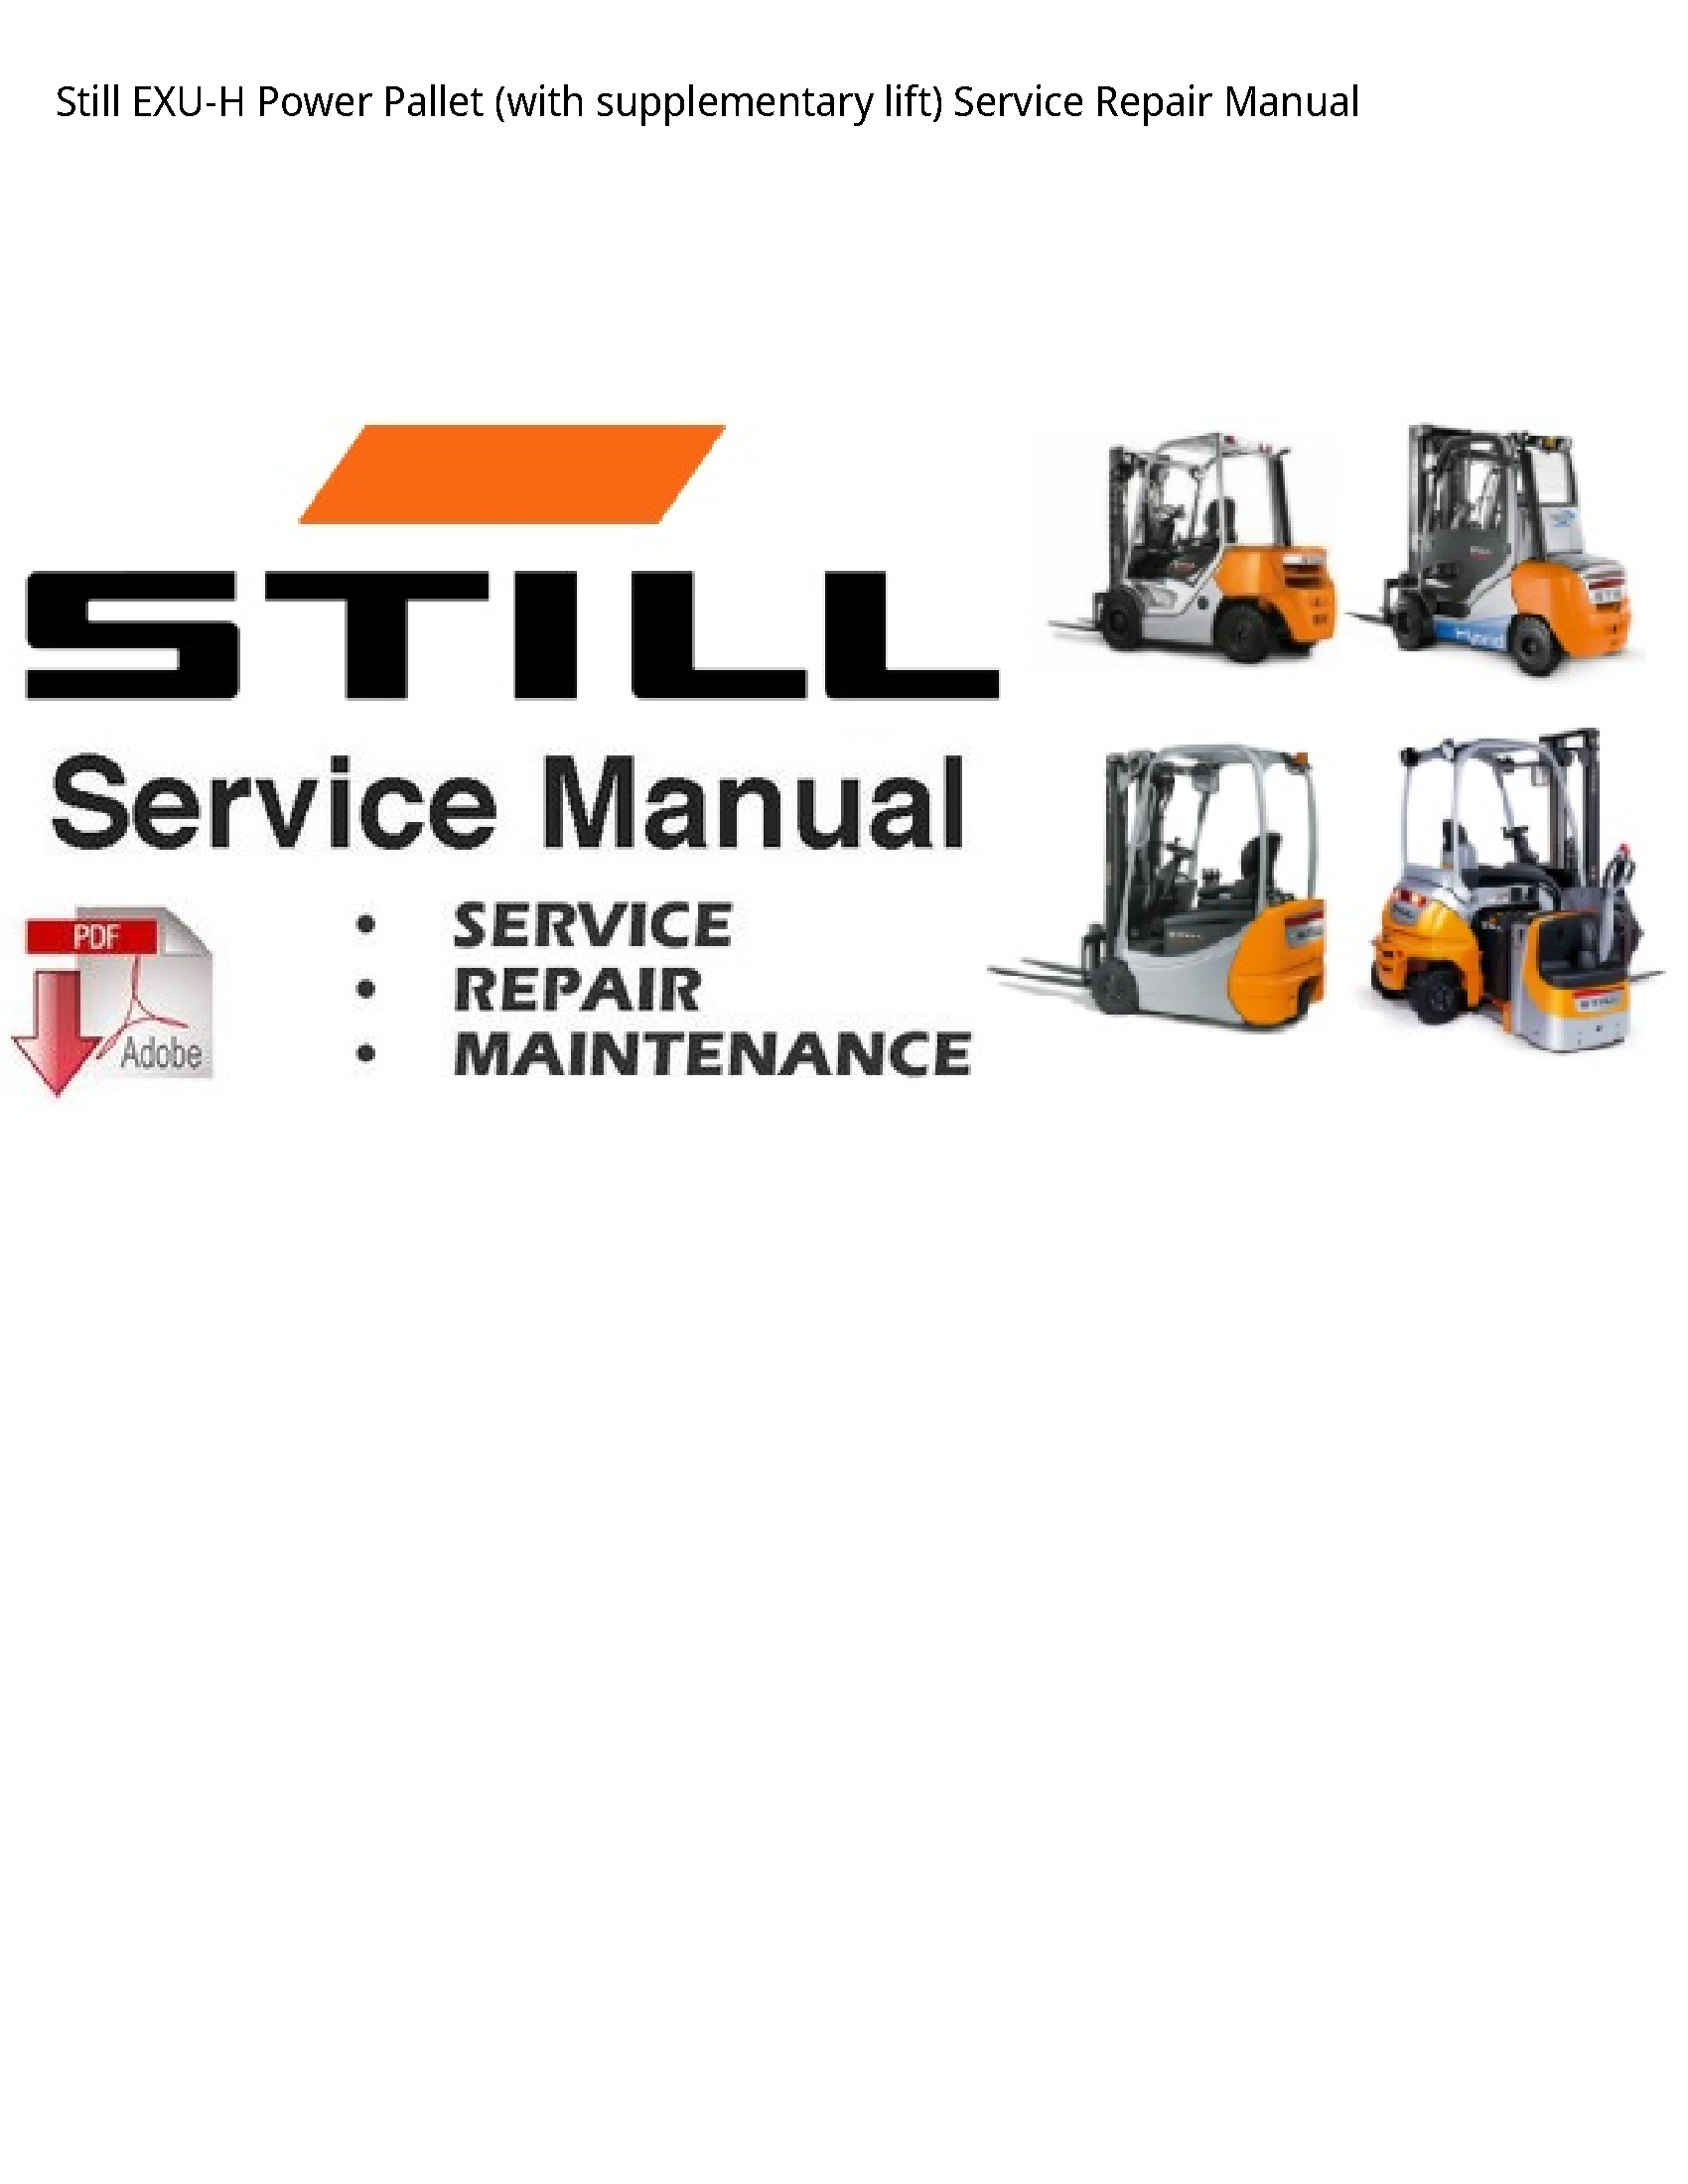 Still EXU-H Power Pallet (with supplementary lift) manual